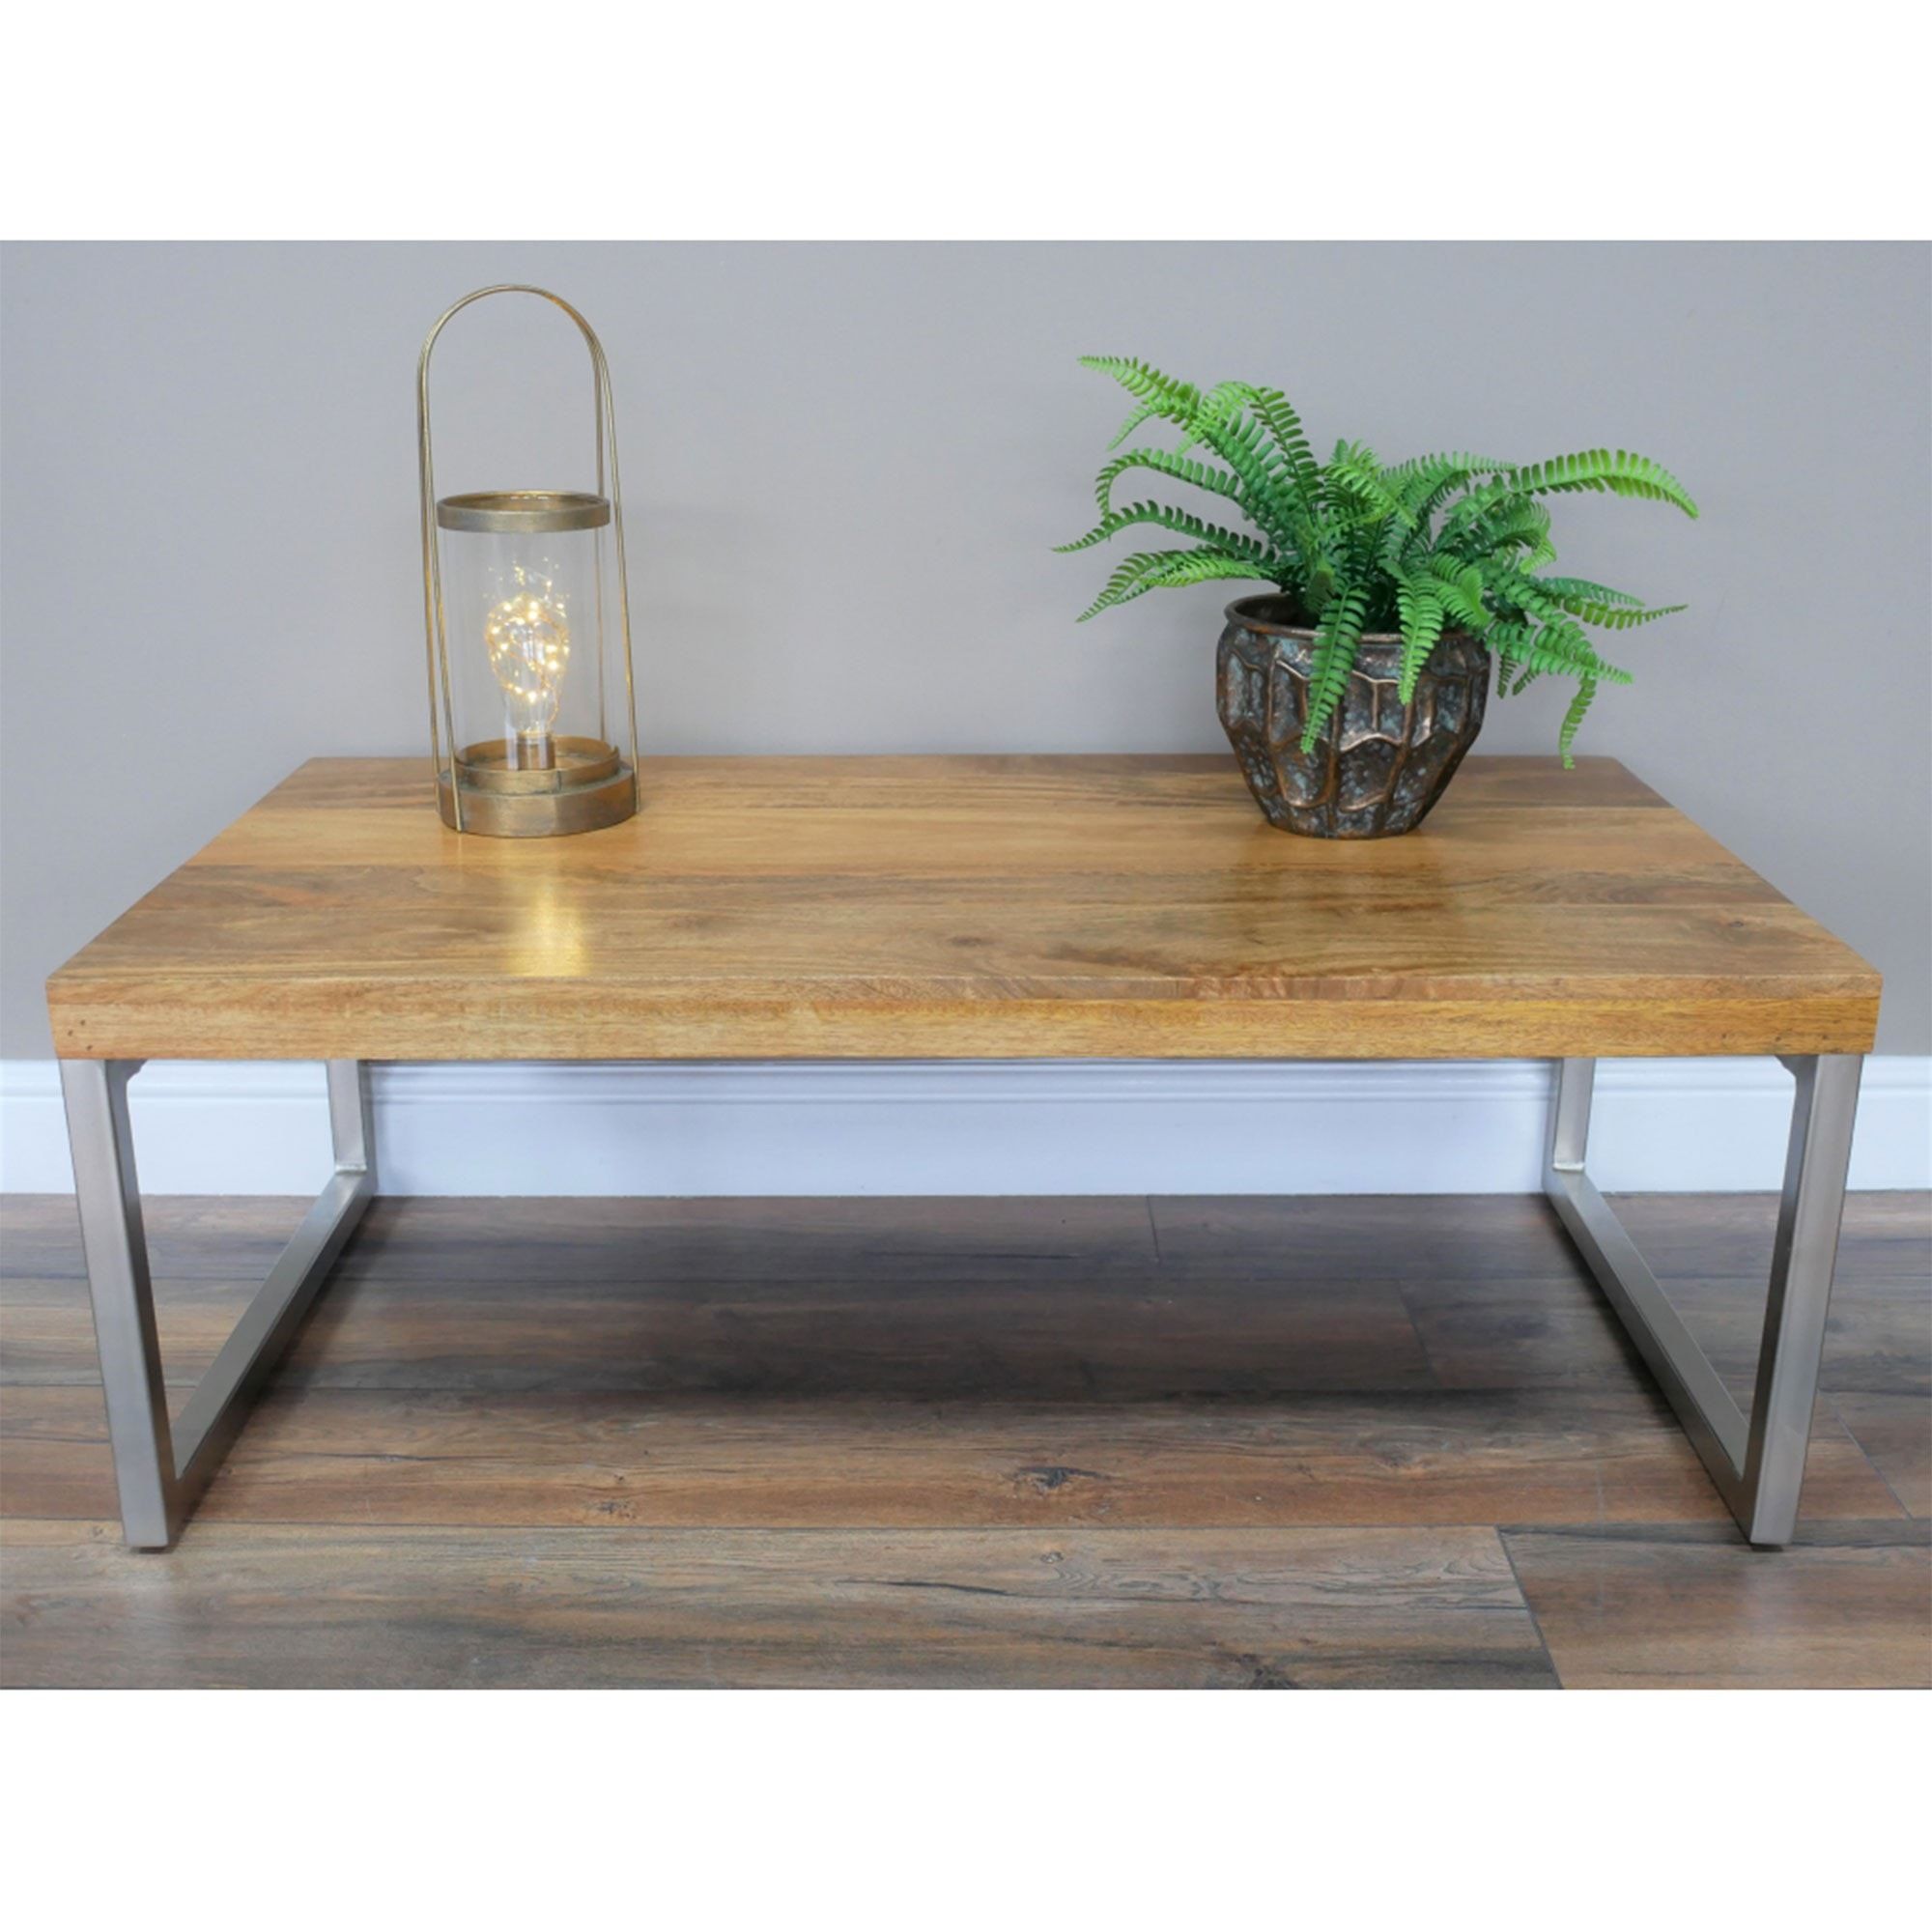 Wooden Top & Metal Rectangular Leg Coffee Table With Regard To Coffee Tables With Metal Legs (View 10 of 15)